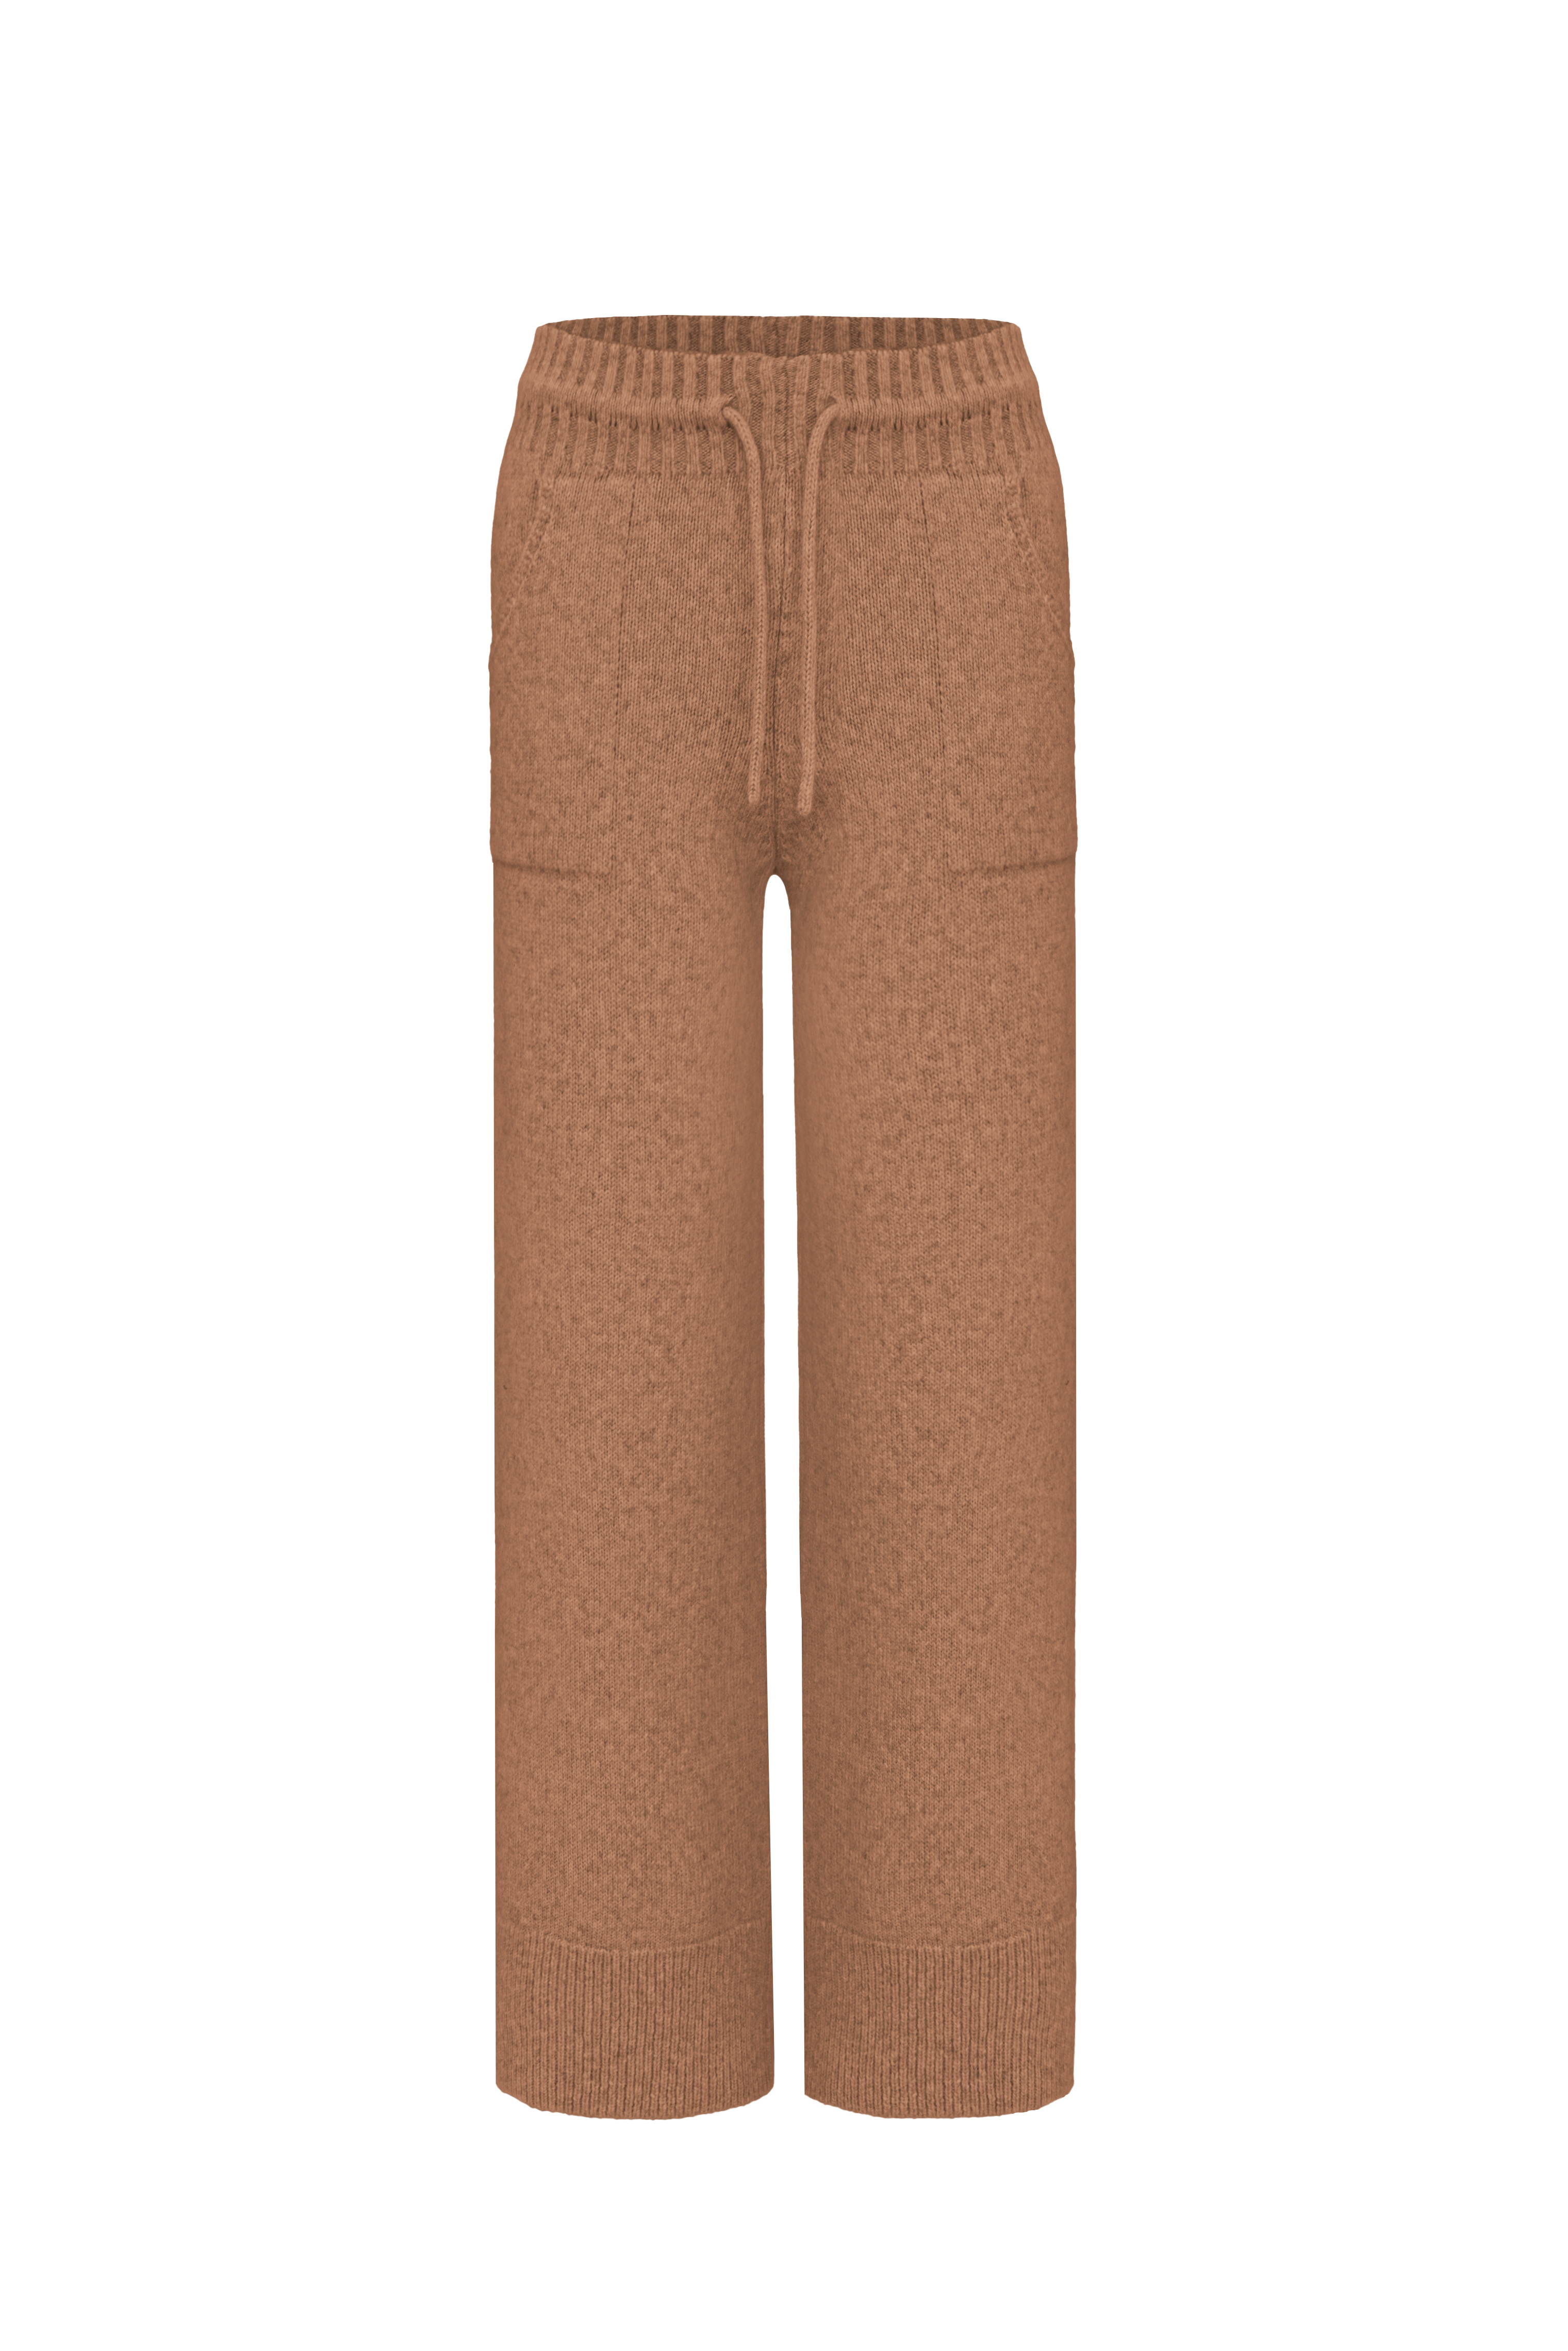 Trousers 3822-128 Camel from BRUSNiKA